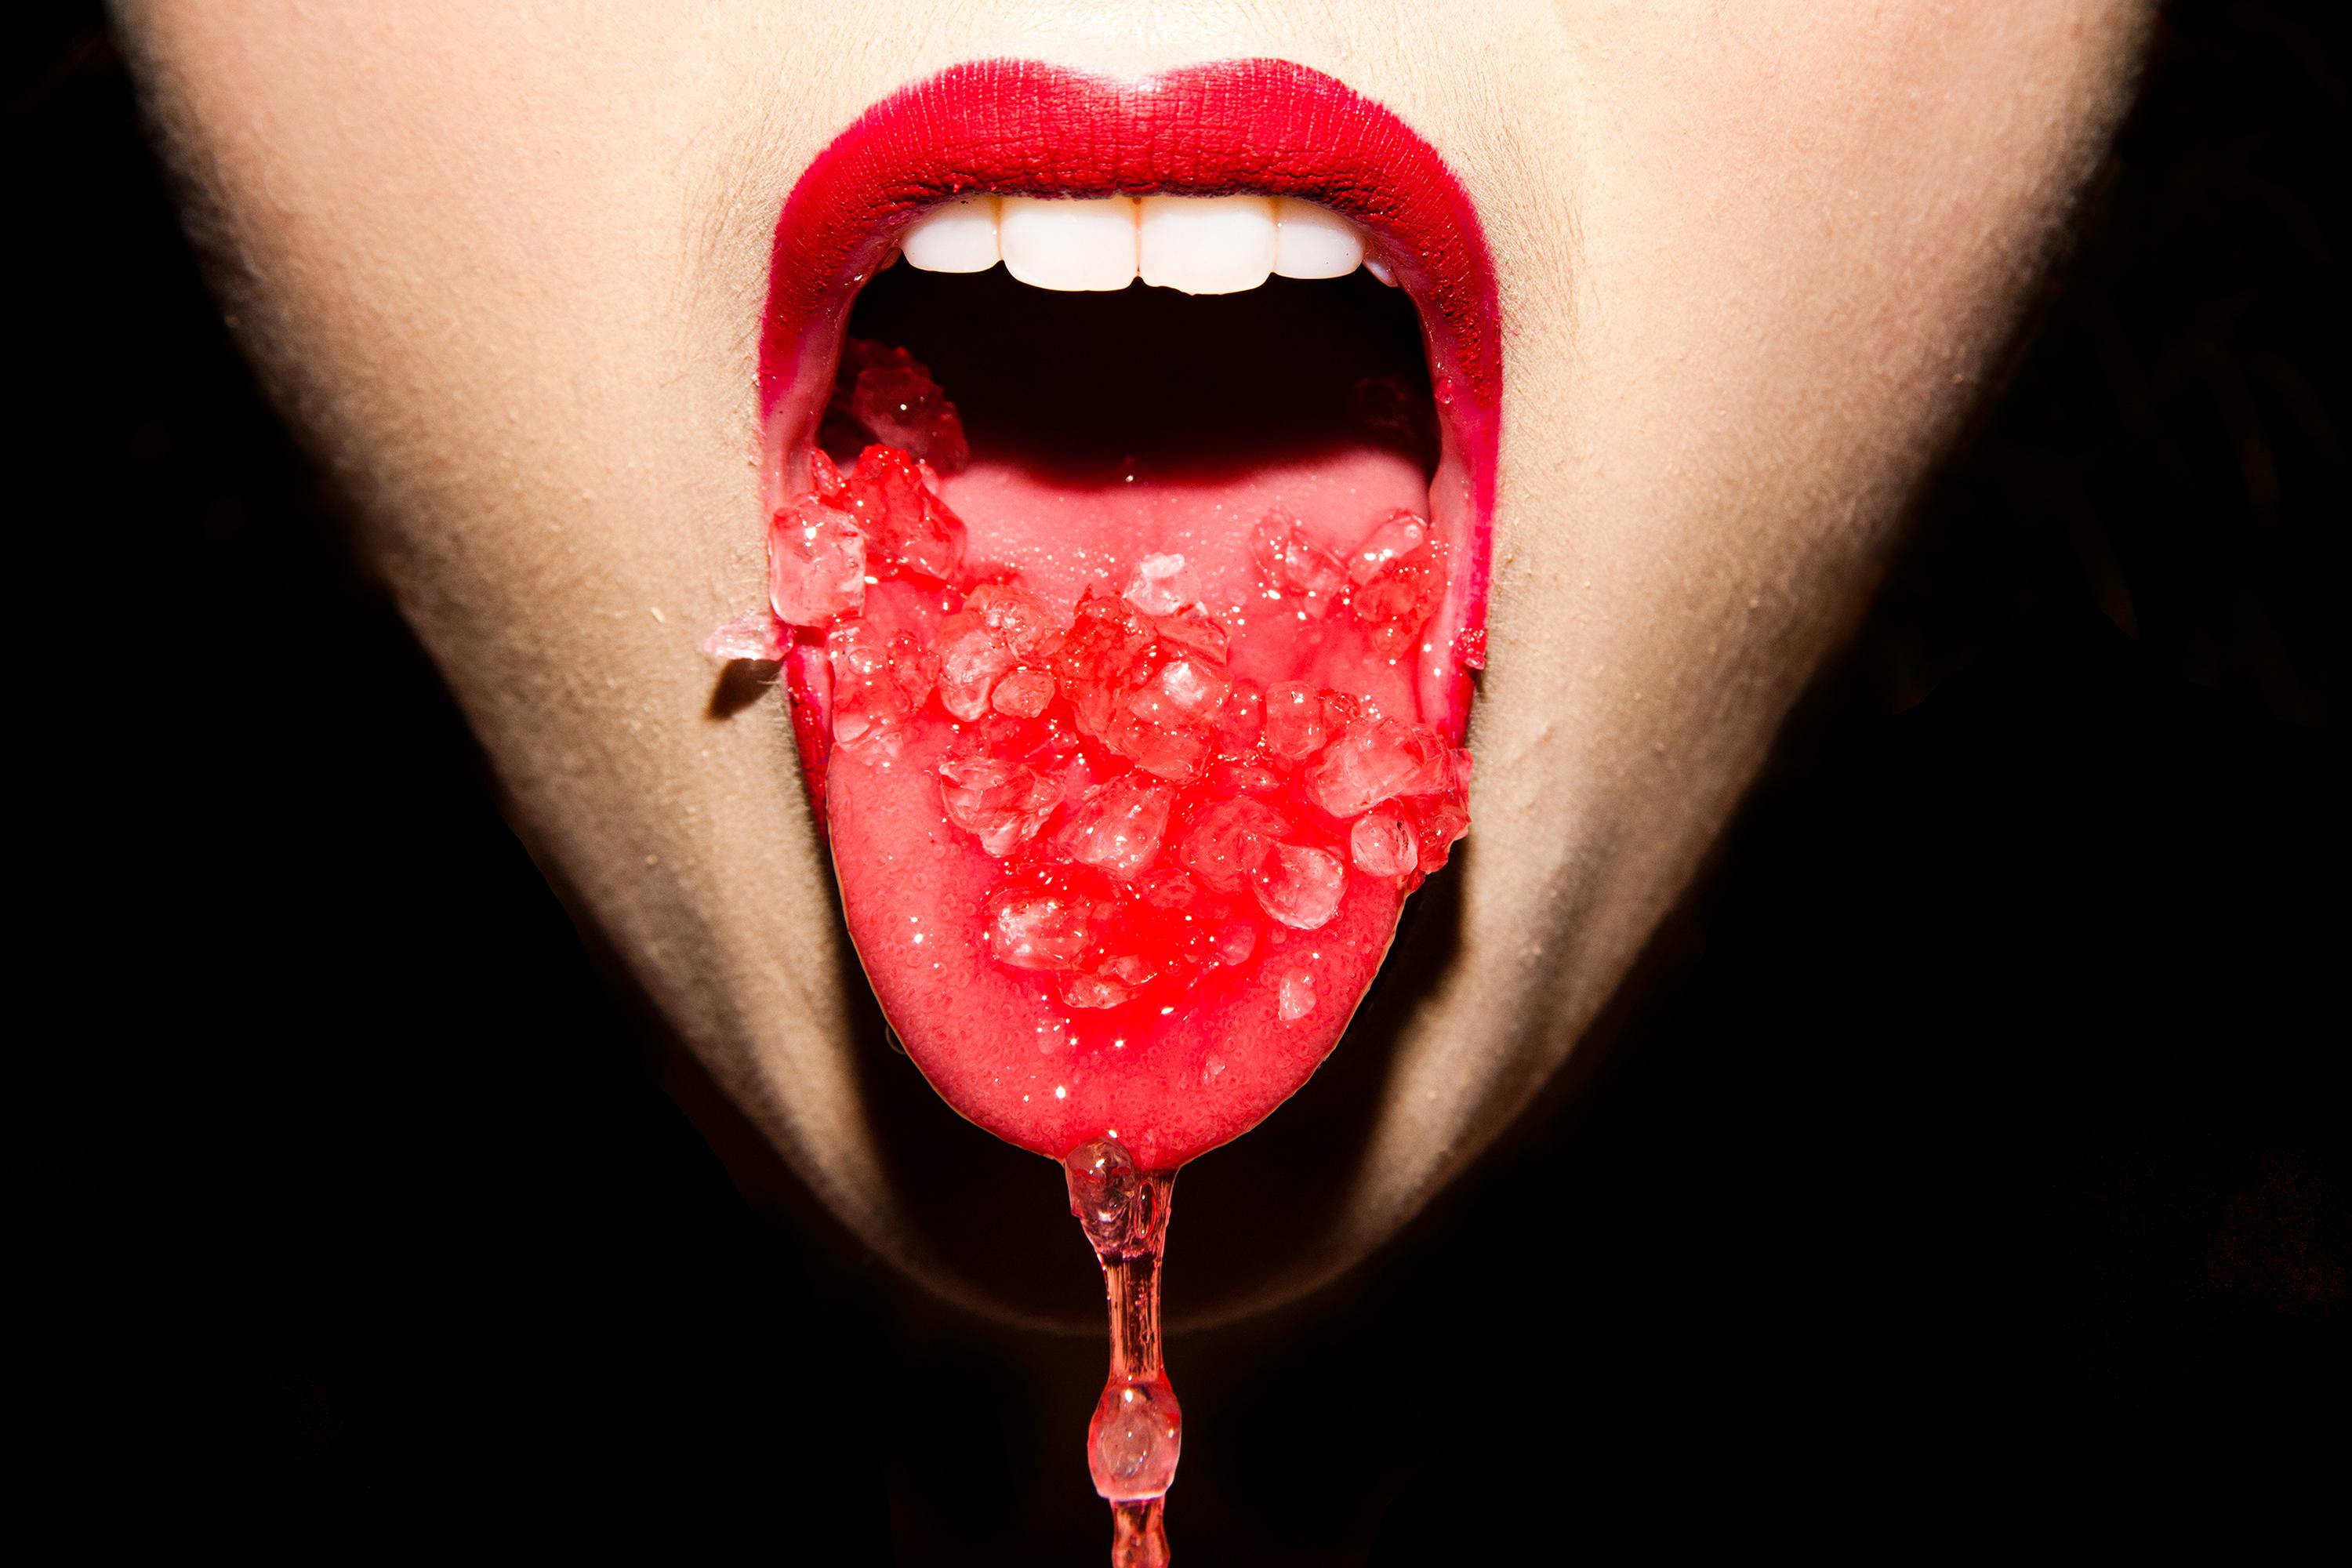 Tyler Shields - Mouth Drip, Photography 2012, Printed After